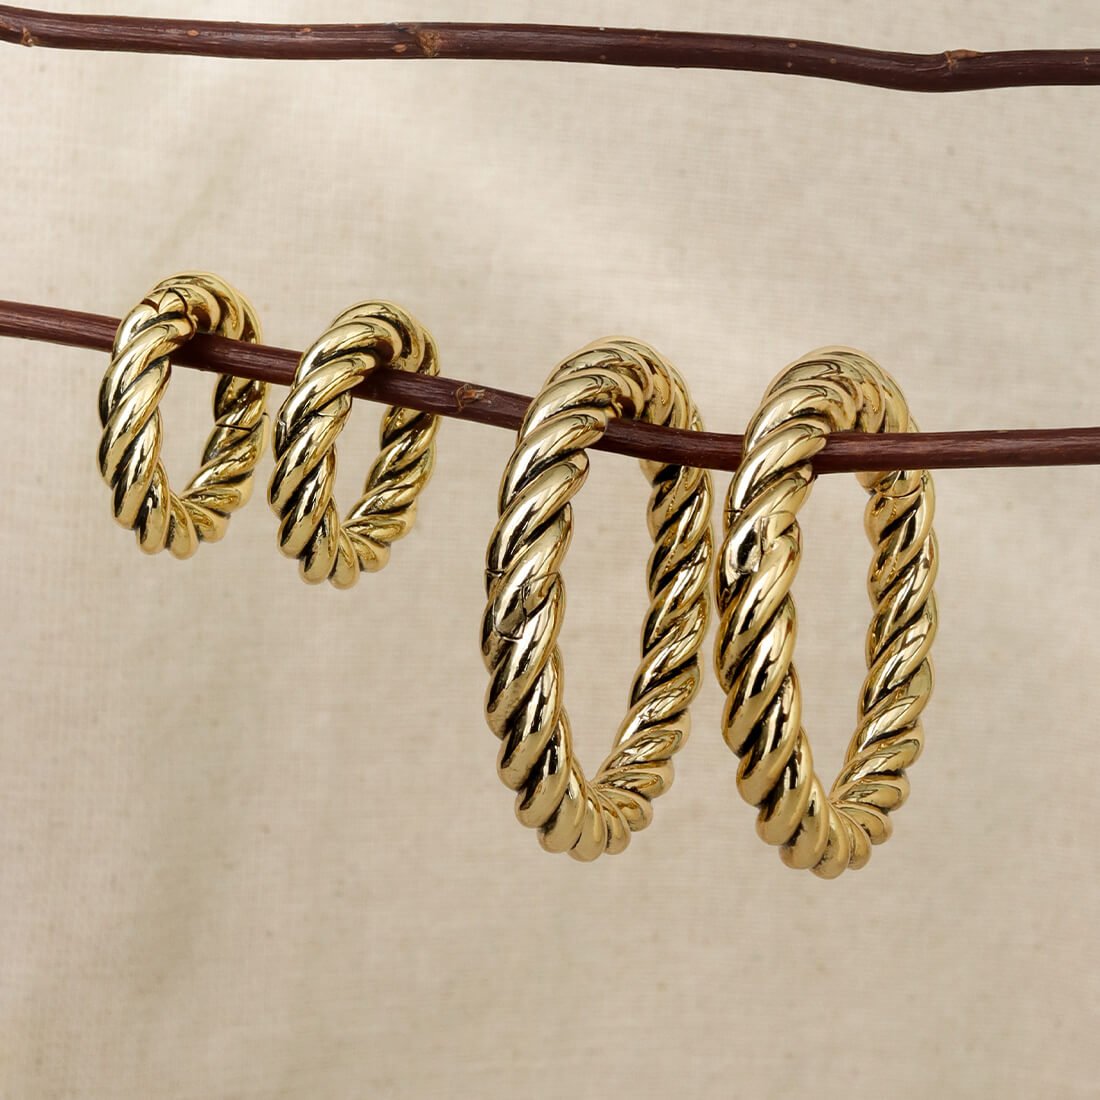 Classic Rope Hangers (2 Sizes) - Hangers - Ask and Embla